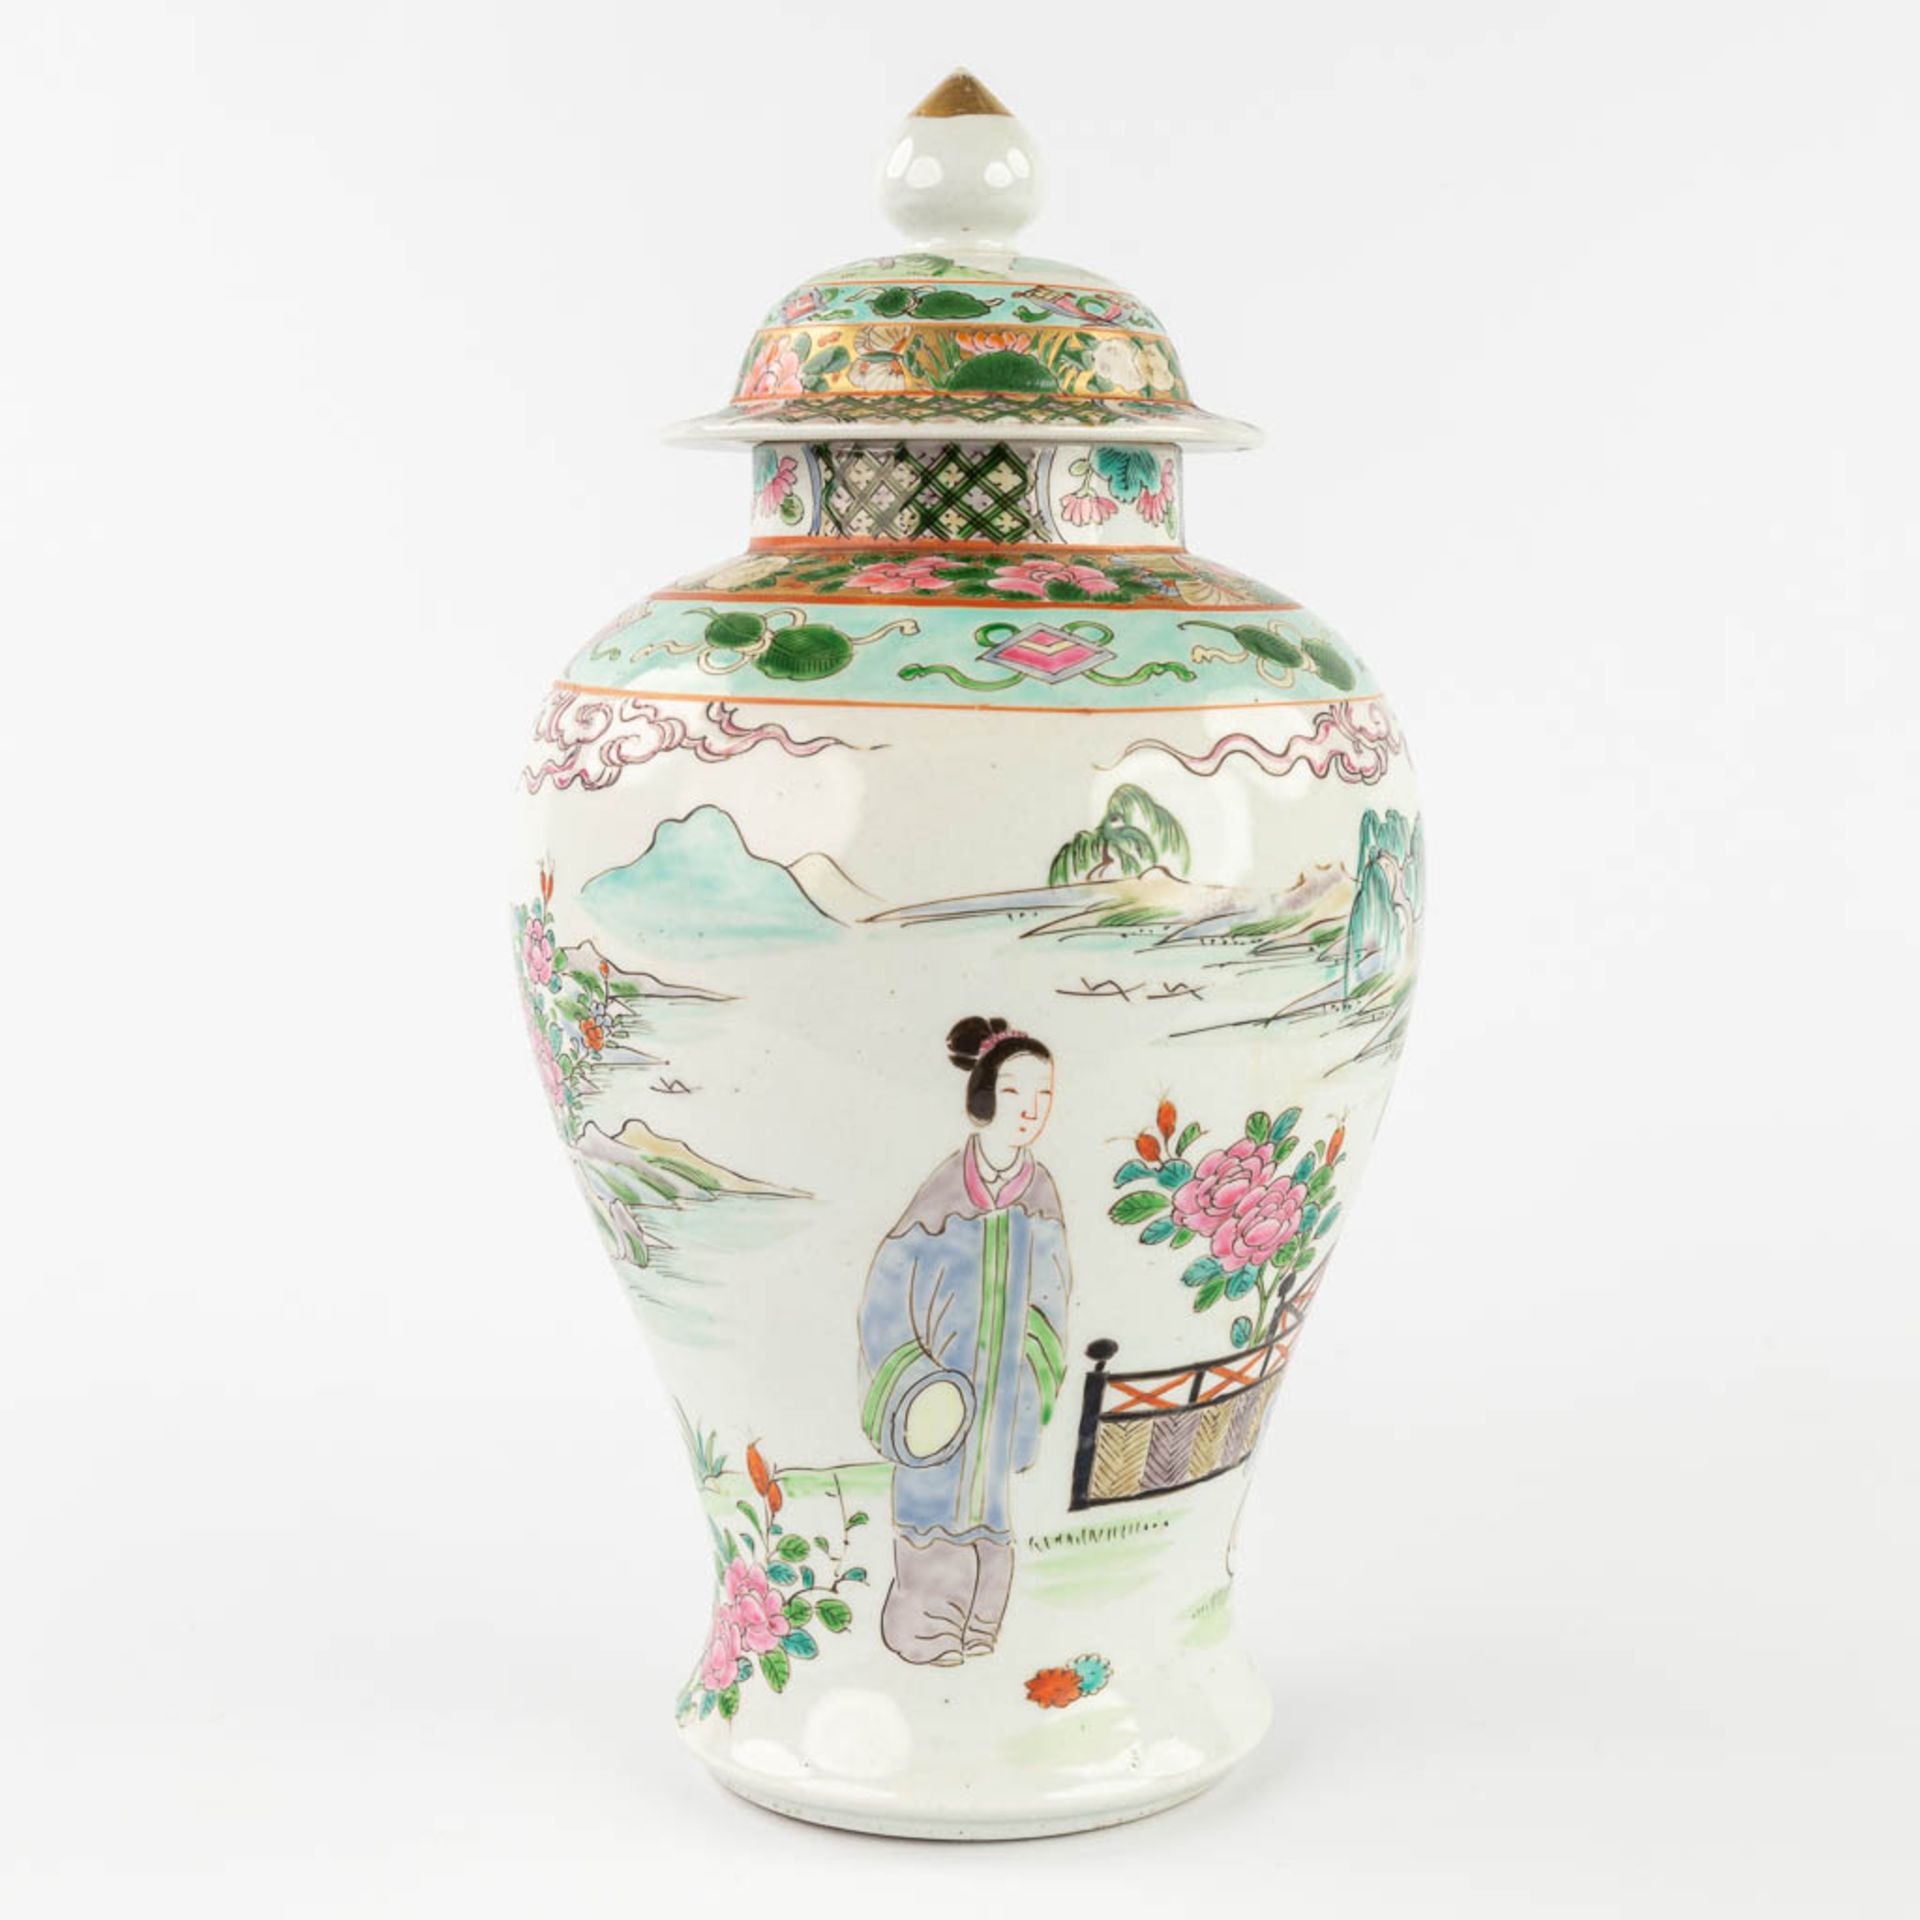 A Japanese baluster vase with lid, decorated with ladies and landscapes. (H:35 x D:18 cm) - Image 6 of 14